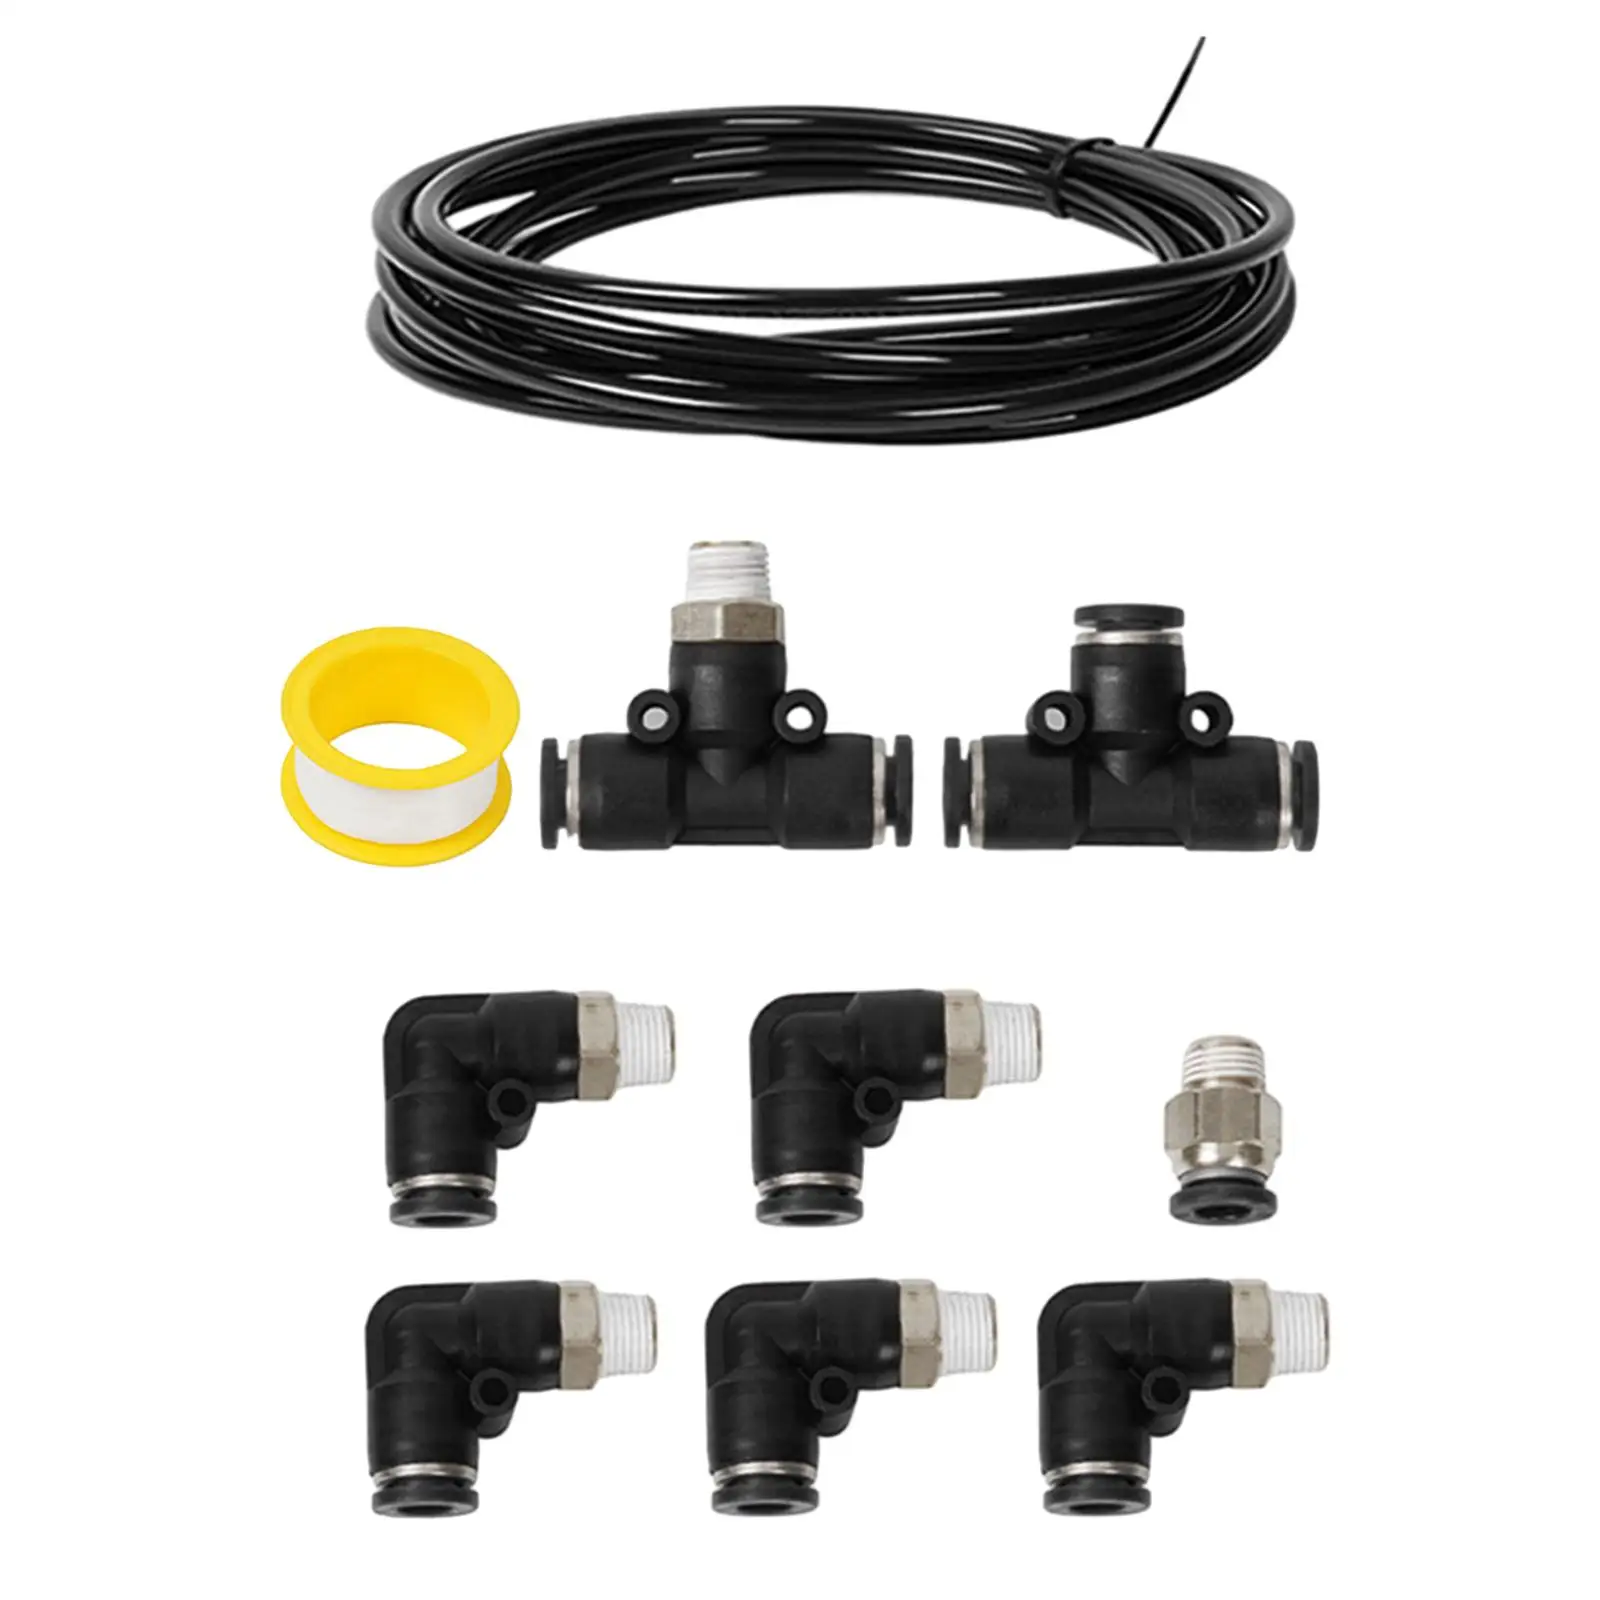 Wastegate Solenoid Connector Set Flexible Easy to Connect Assembly for Turbocharged Vehicle Durable Convenient Installation